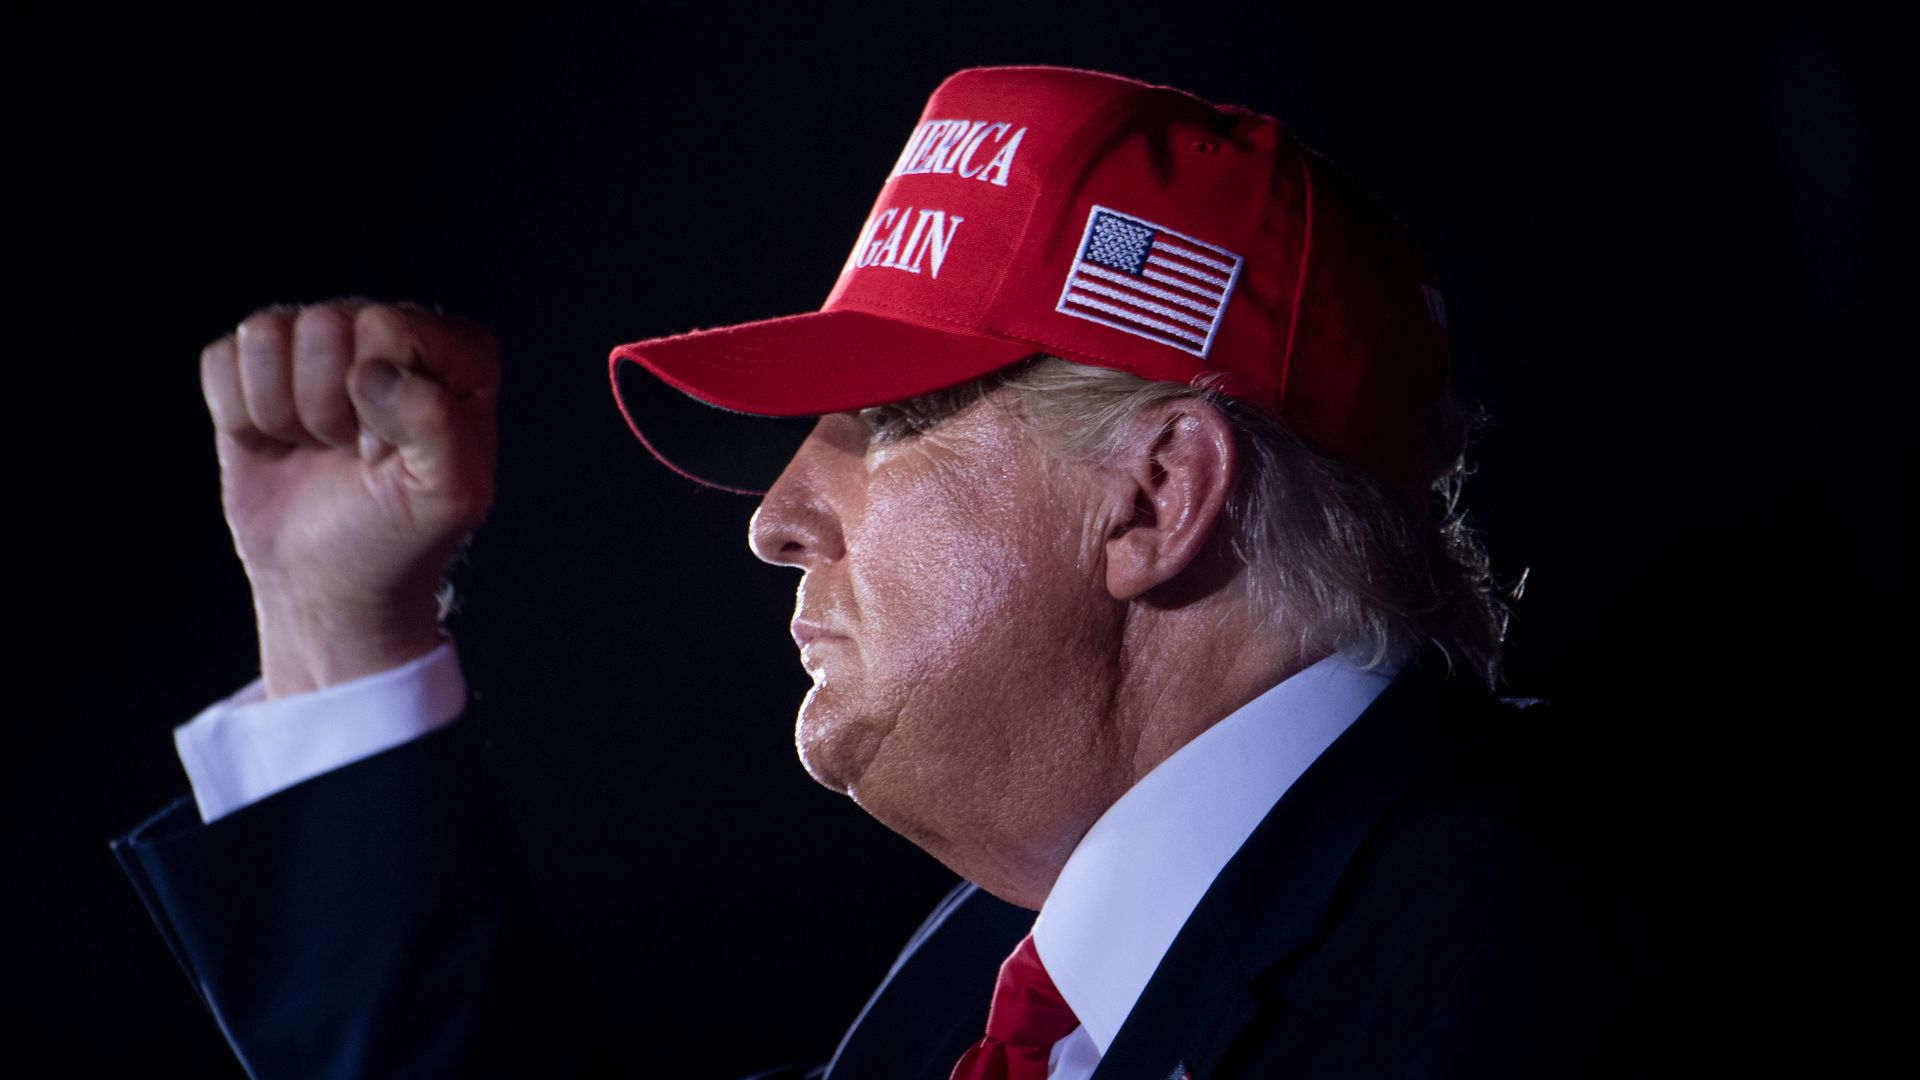 President Trump in profile, close up, in a red MAGA cap, pumping his fist.